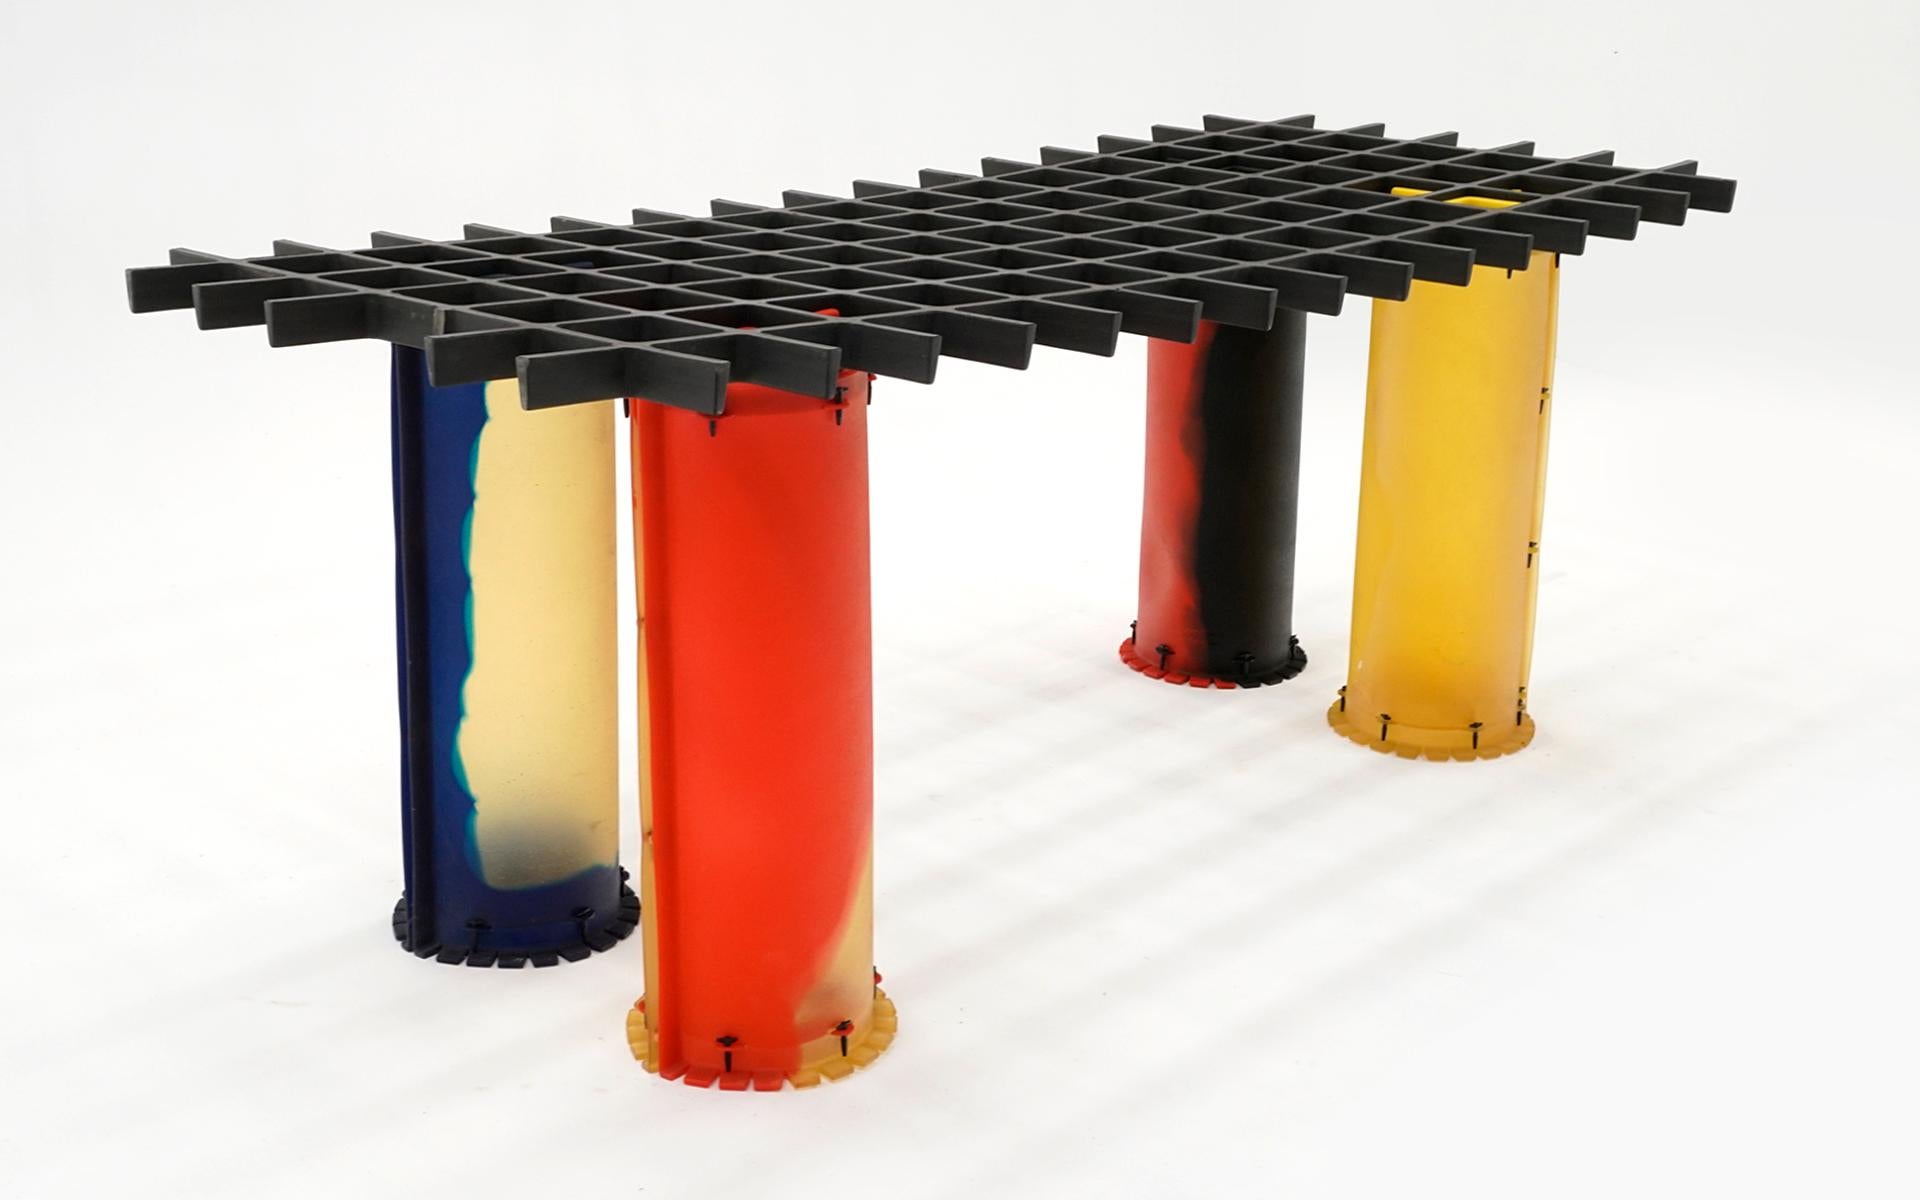 Gaetano Pesce, Nobody's Perfect Zerodesegno Dining Table, Multicolor Resin In Good Condition For Sale In Kansas City, MO